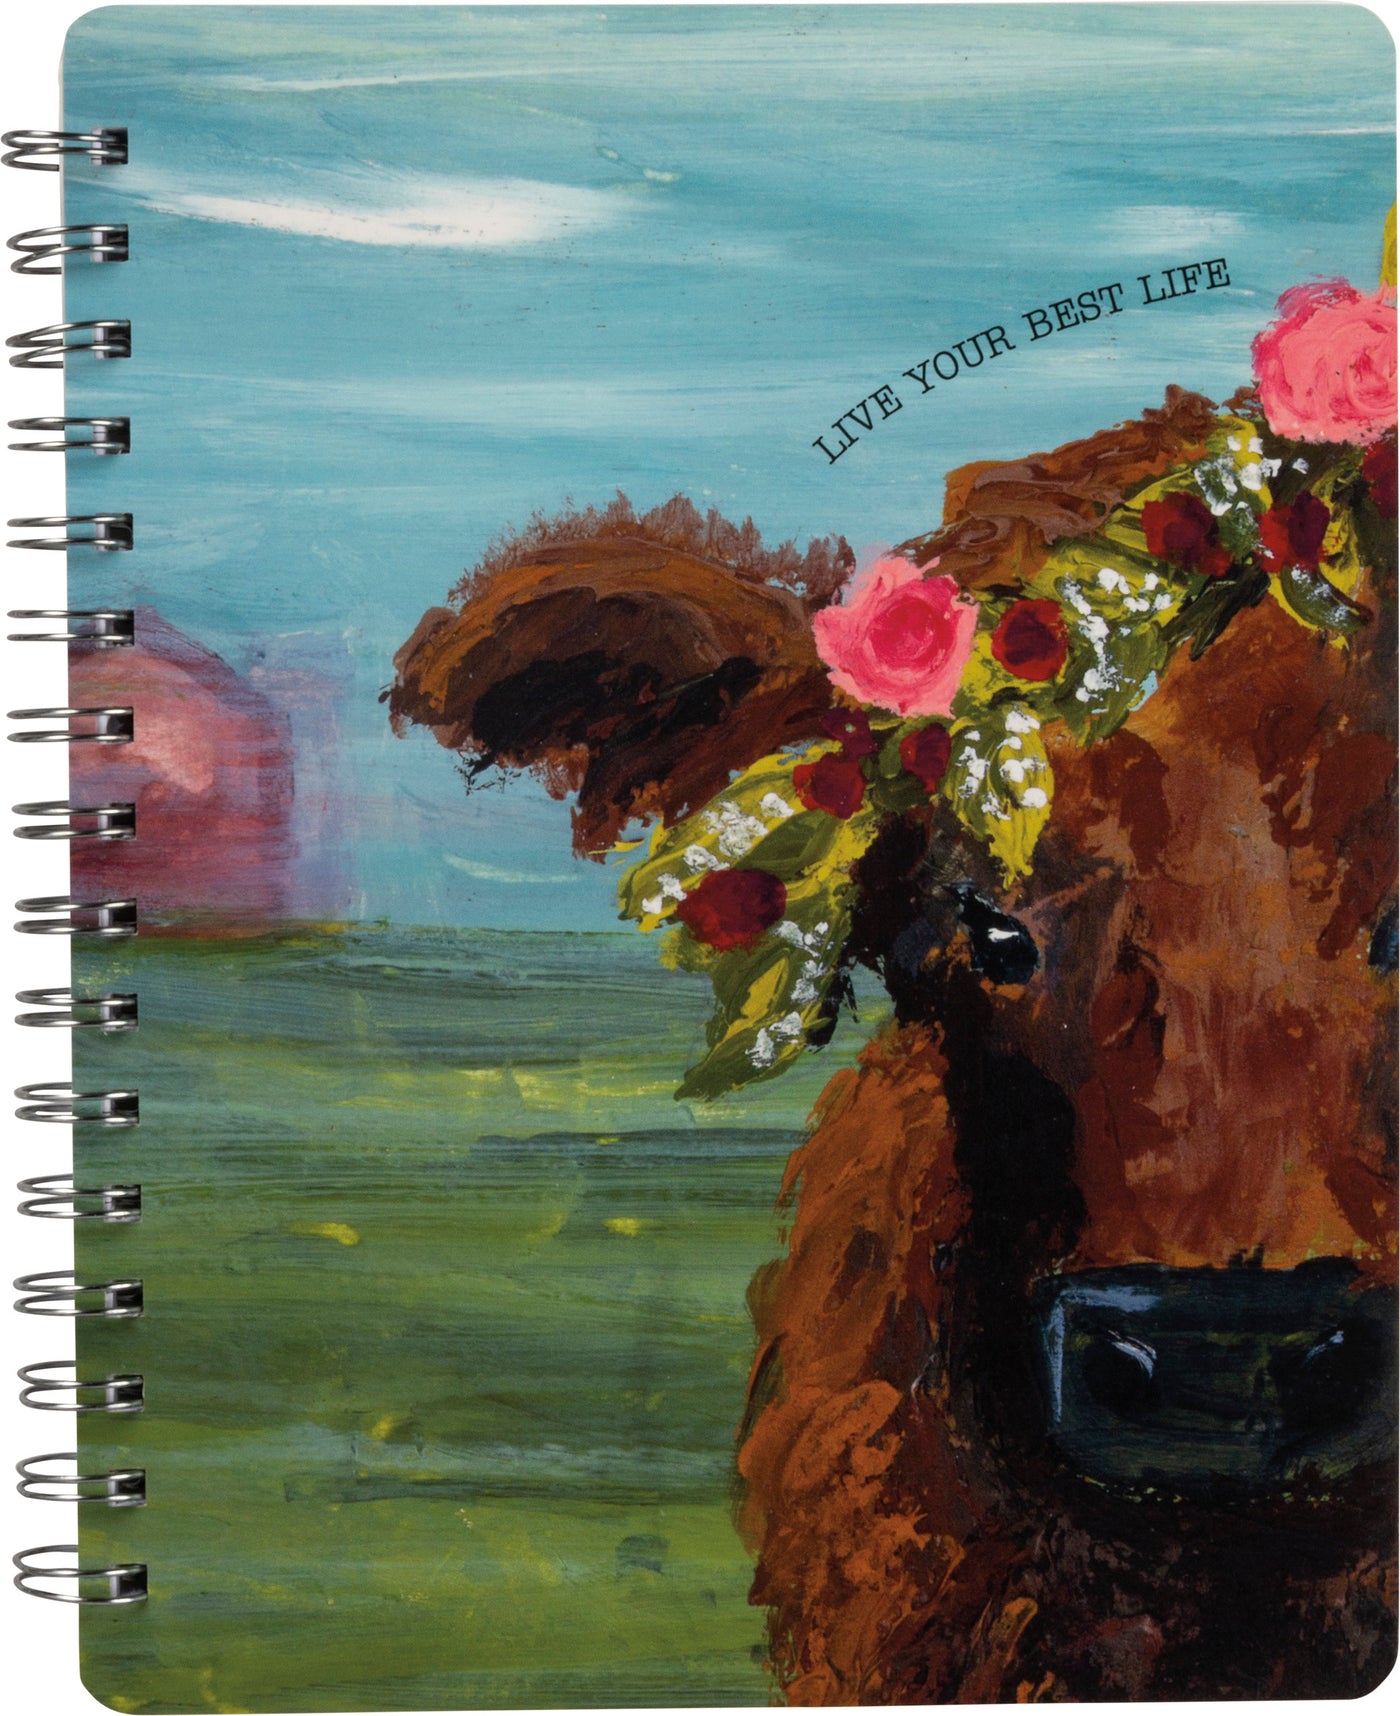 Live Your Best Life Cow Spiral Journal Notebook